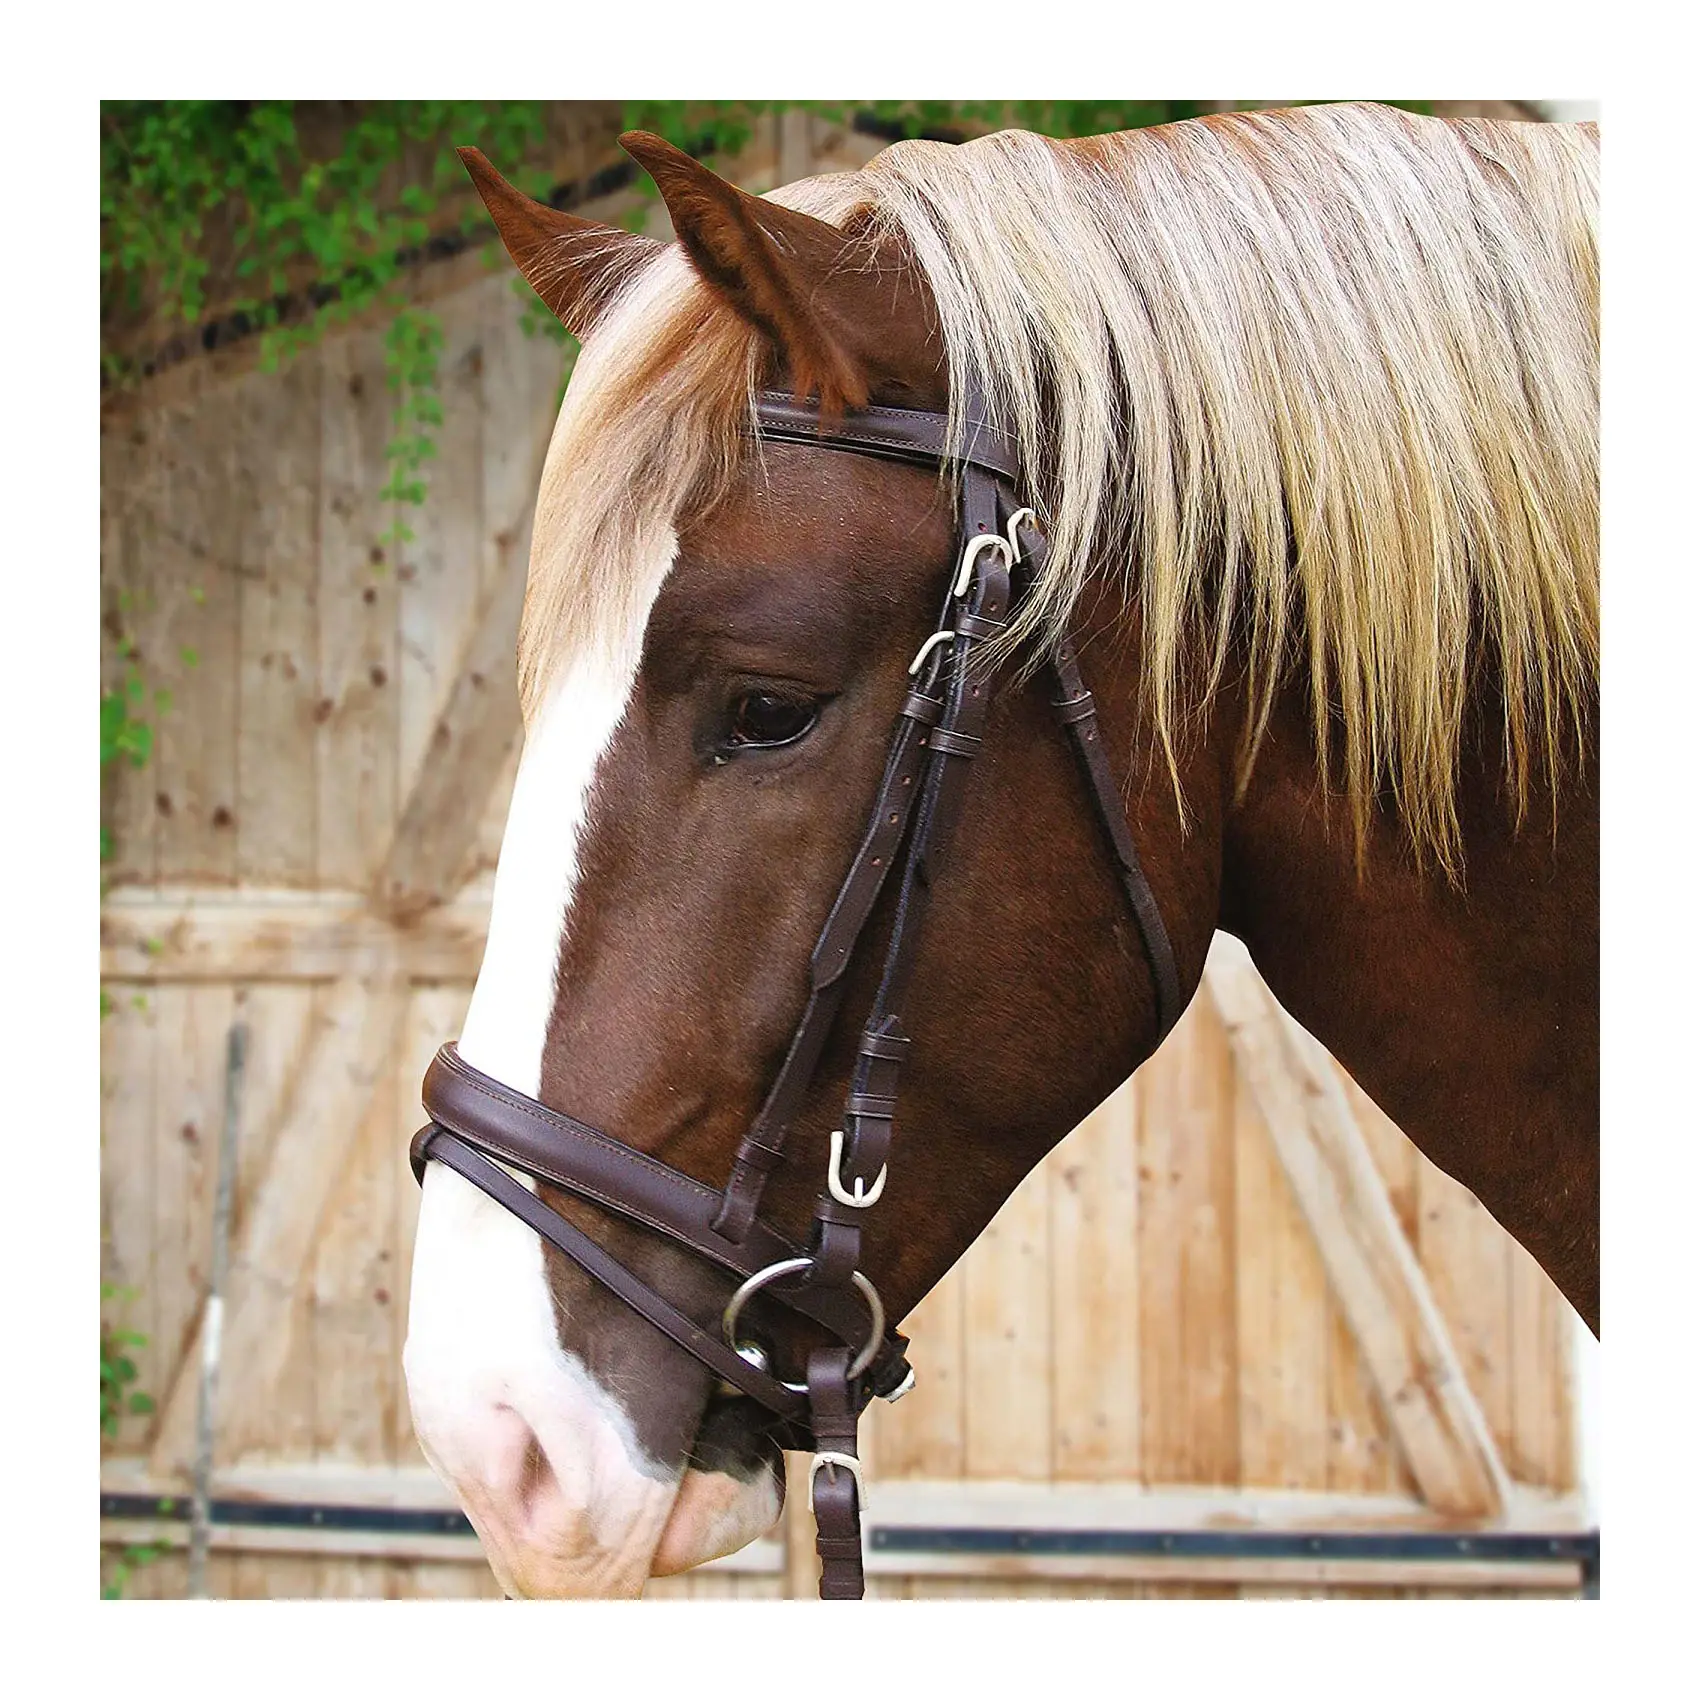 Leather Horse Bridle with Reins in Great Quality Horse Stocked Equestrian Products Snaffle Bridle Custom Wholesaler From India